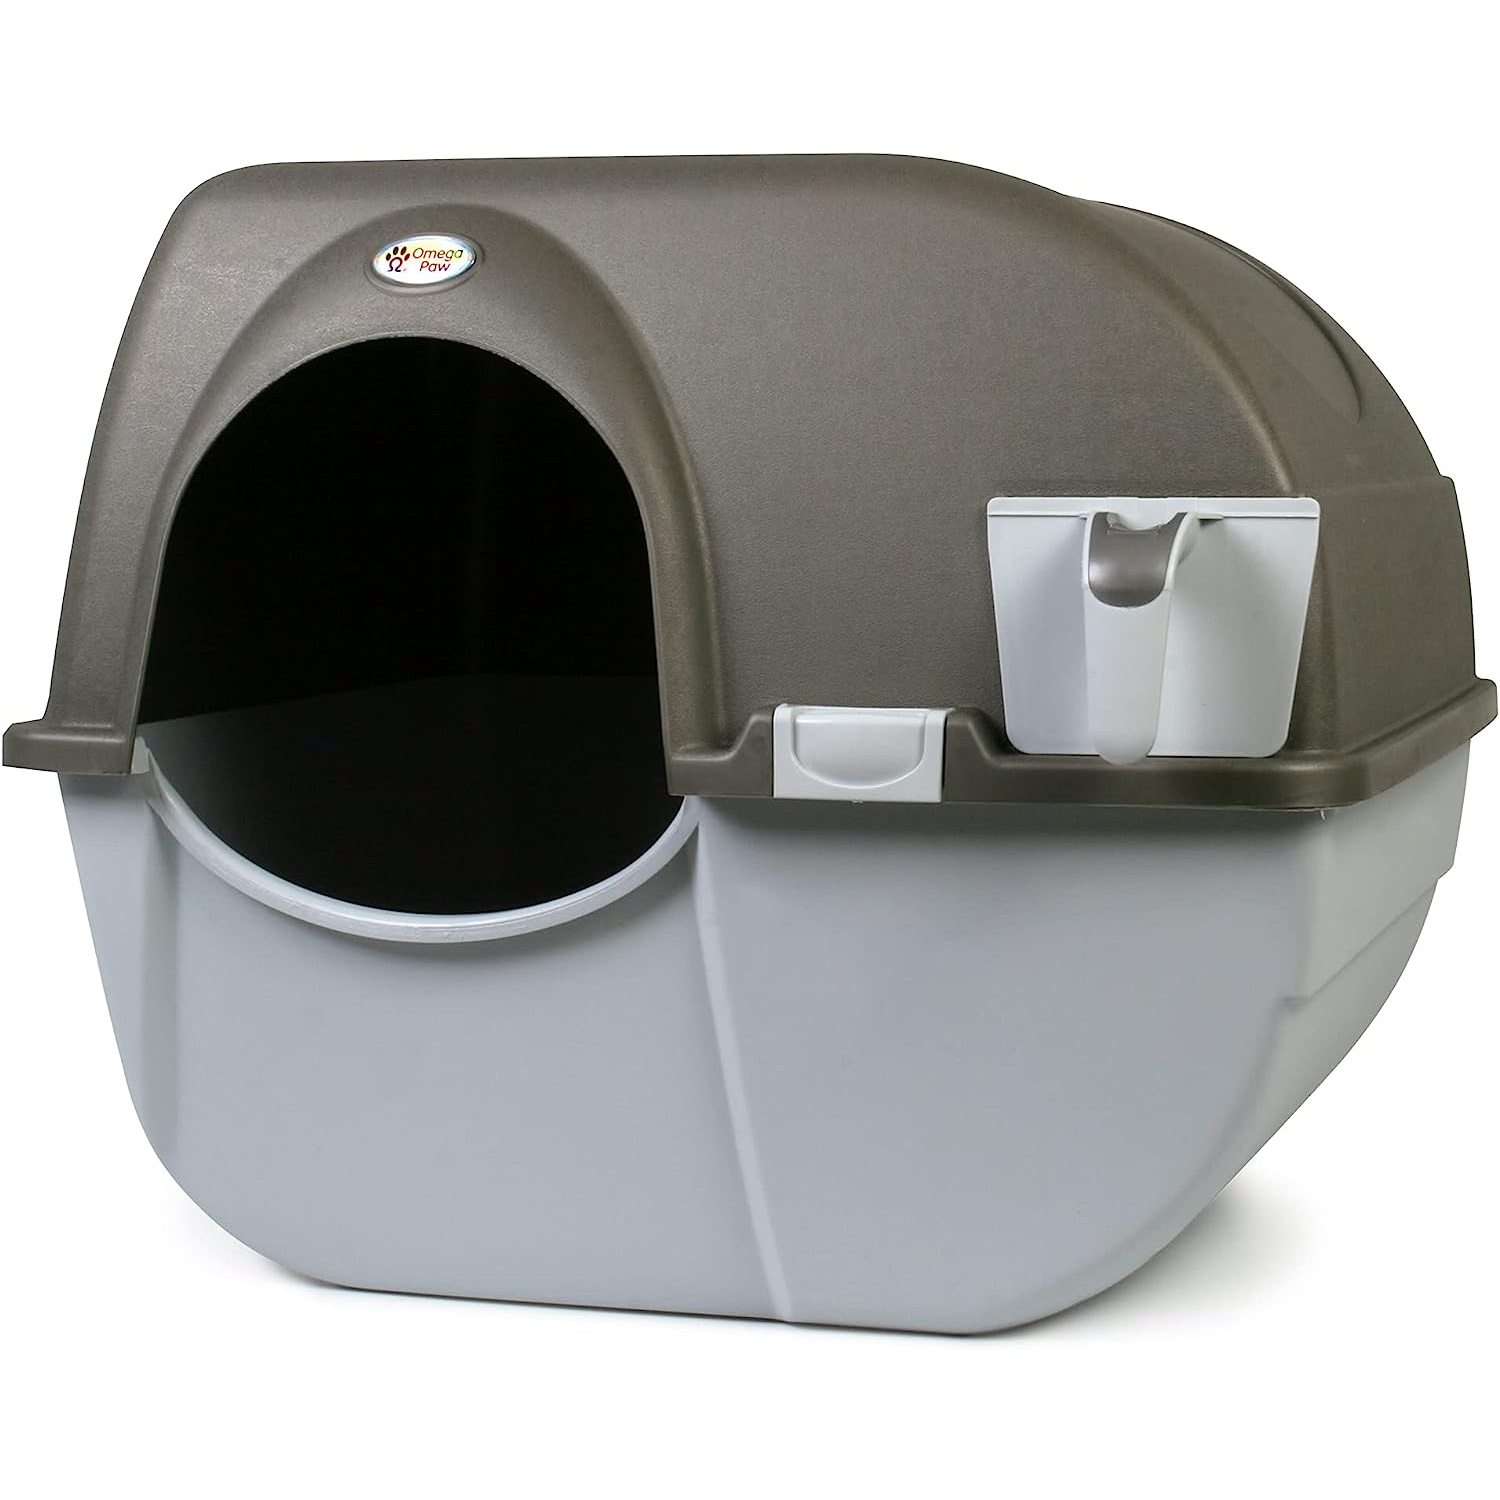 Omega Paw NRA15 Self Cleaning Litter Box Regular Size,Grey new